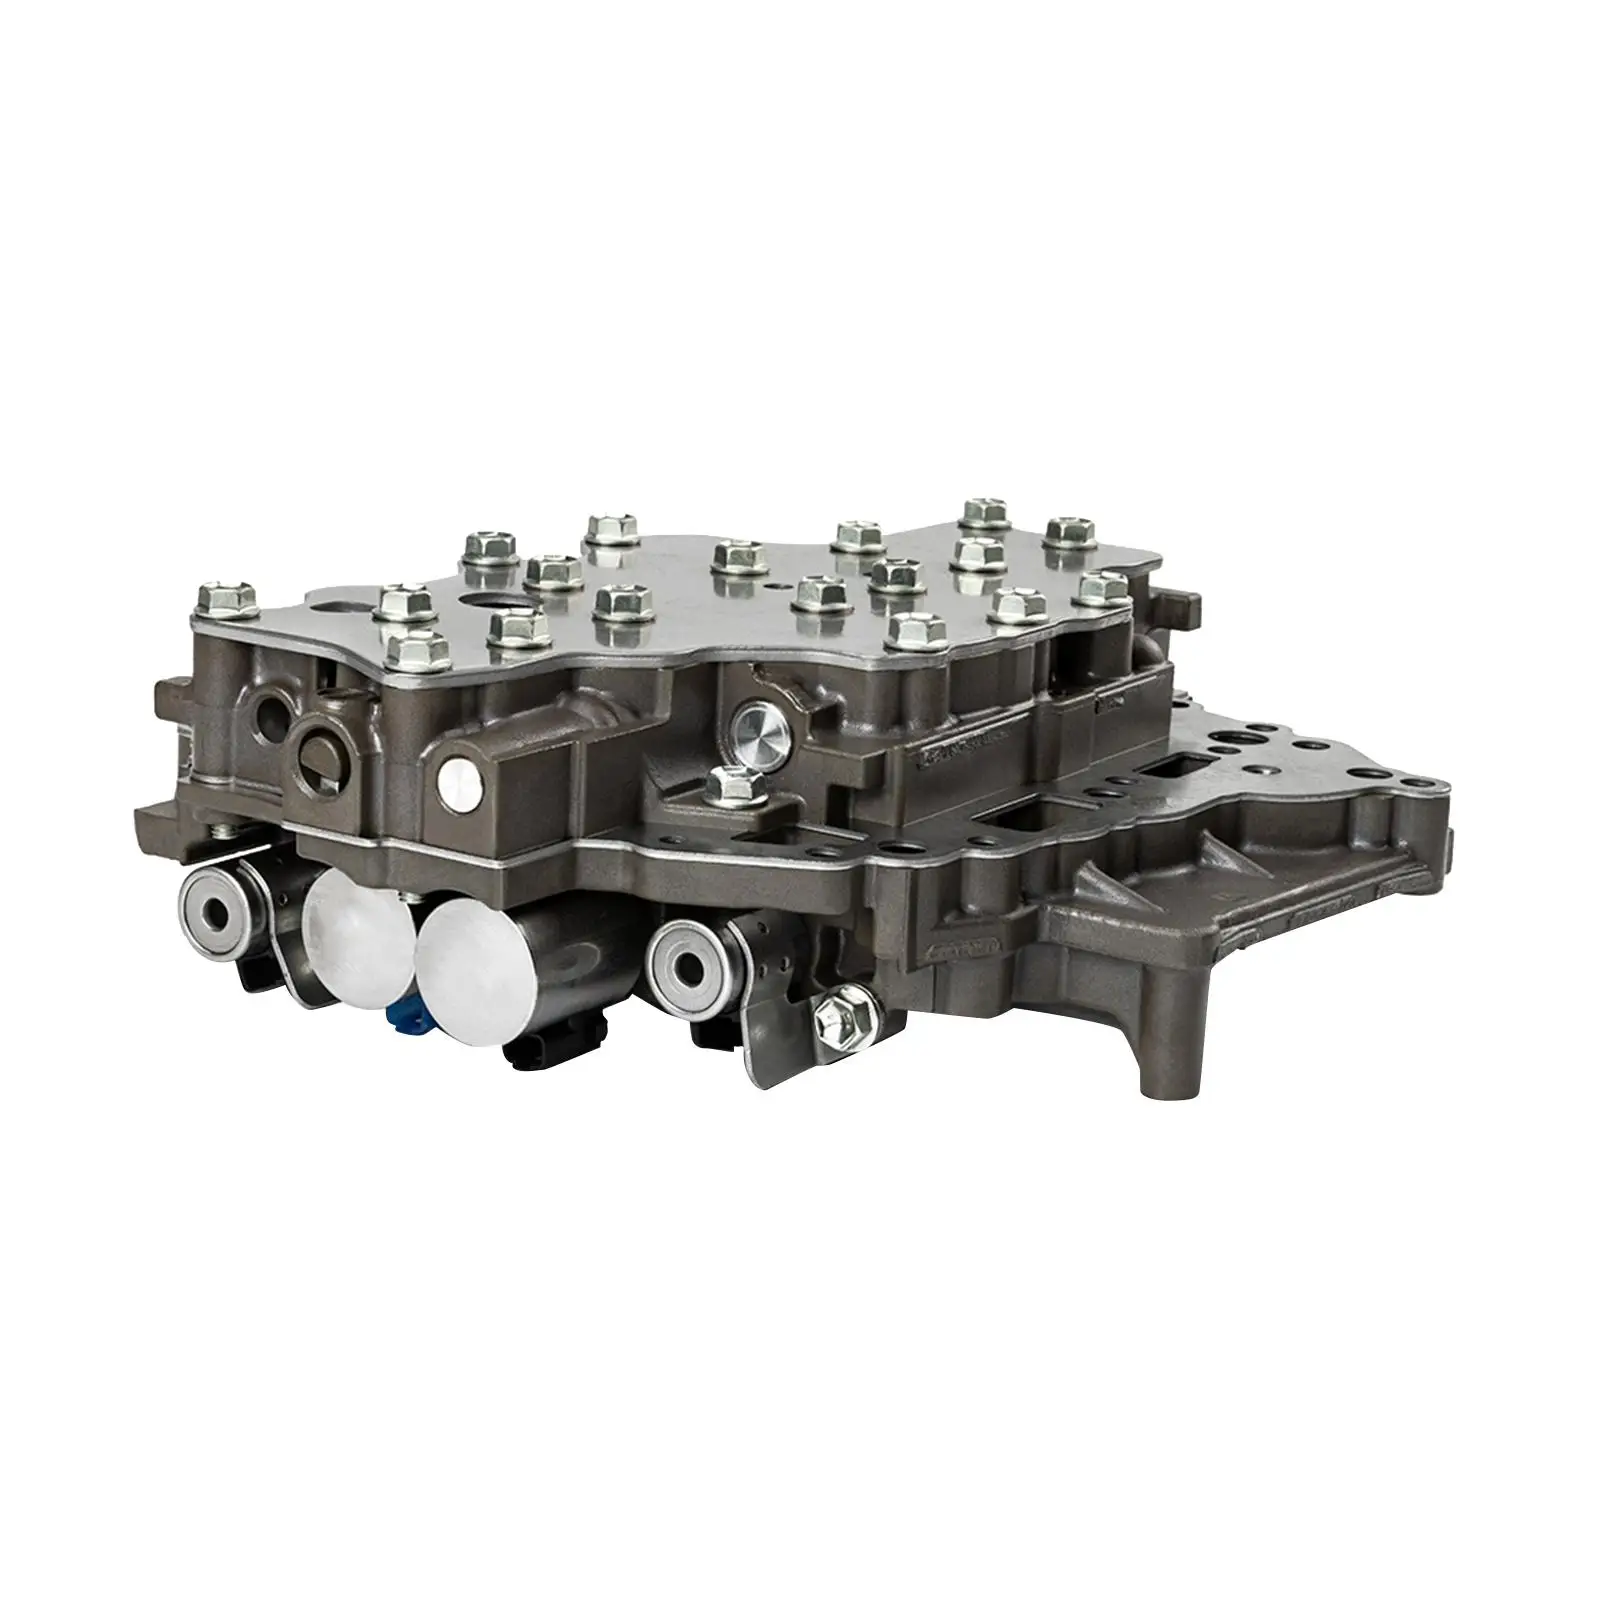 Automatic Transmission Gearbox Valve Body K313 for  Allion1.2L Wish15 to - £503.04 GBP